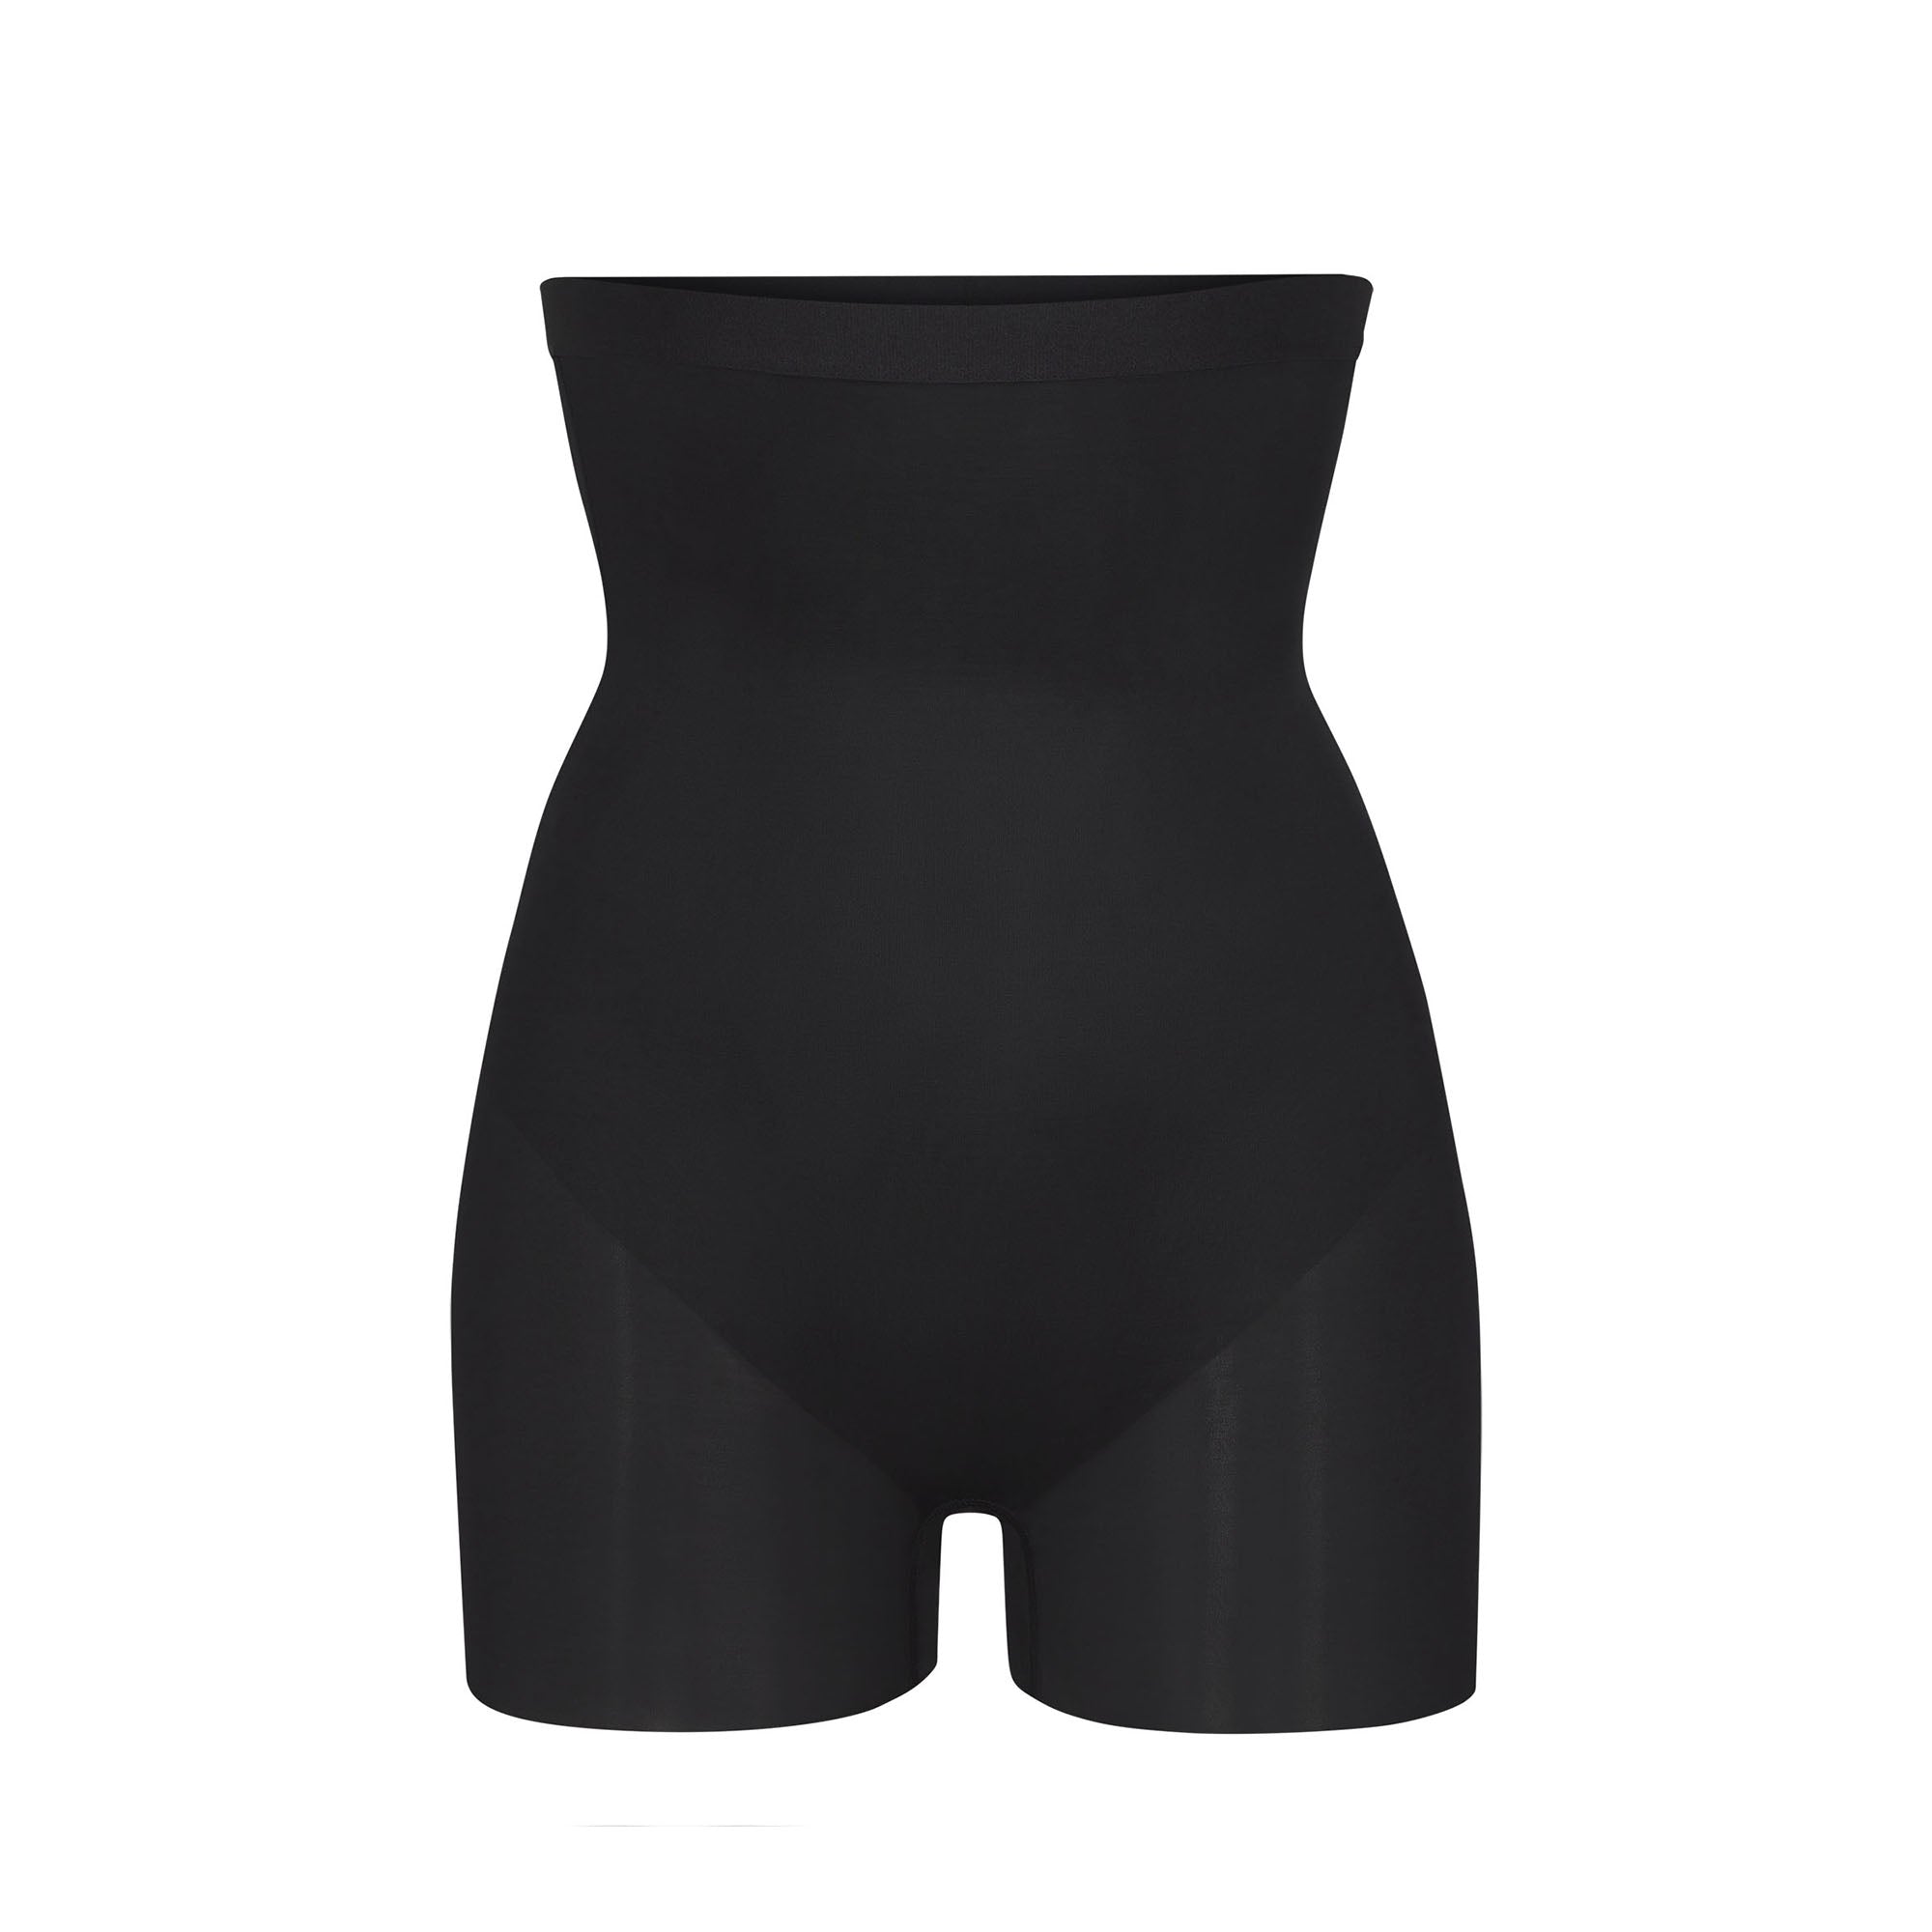 BARELY THERE' SEAMLESS SOLUTION SHORT